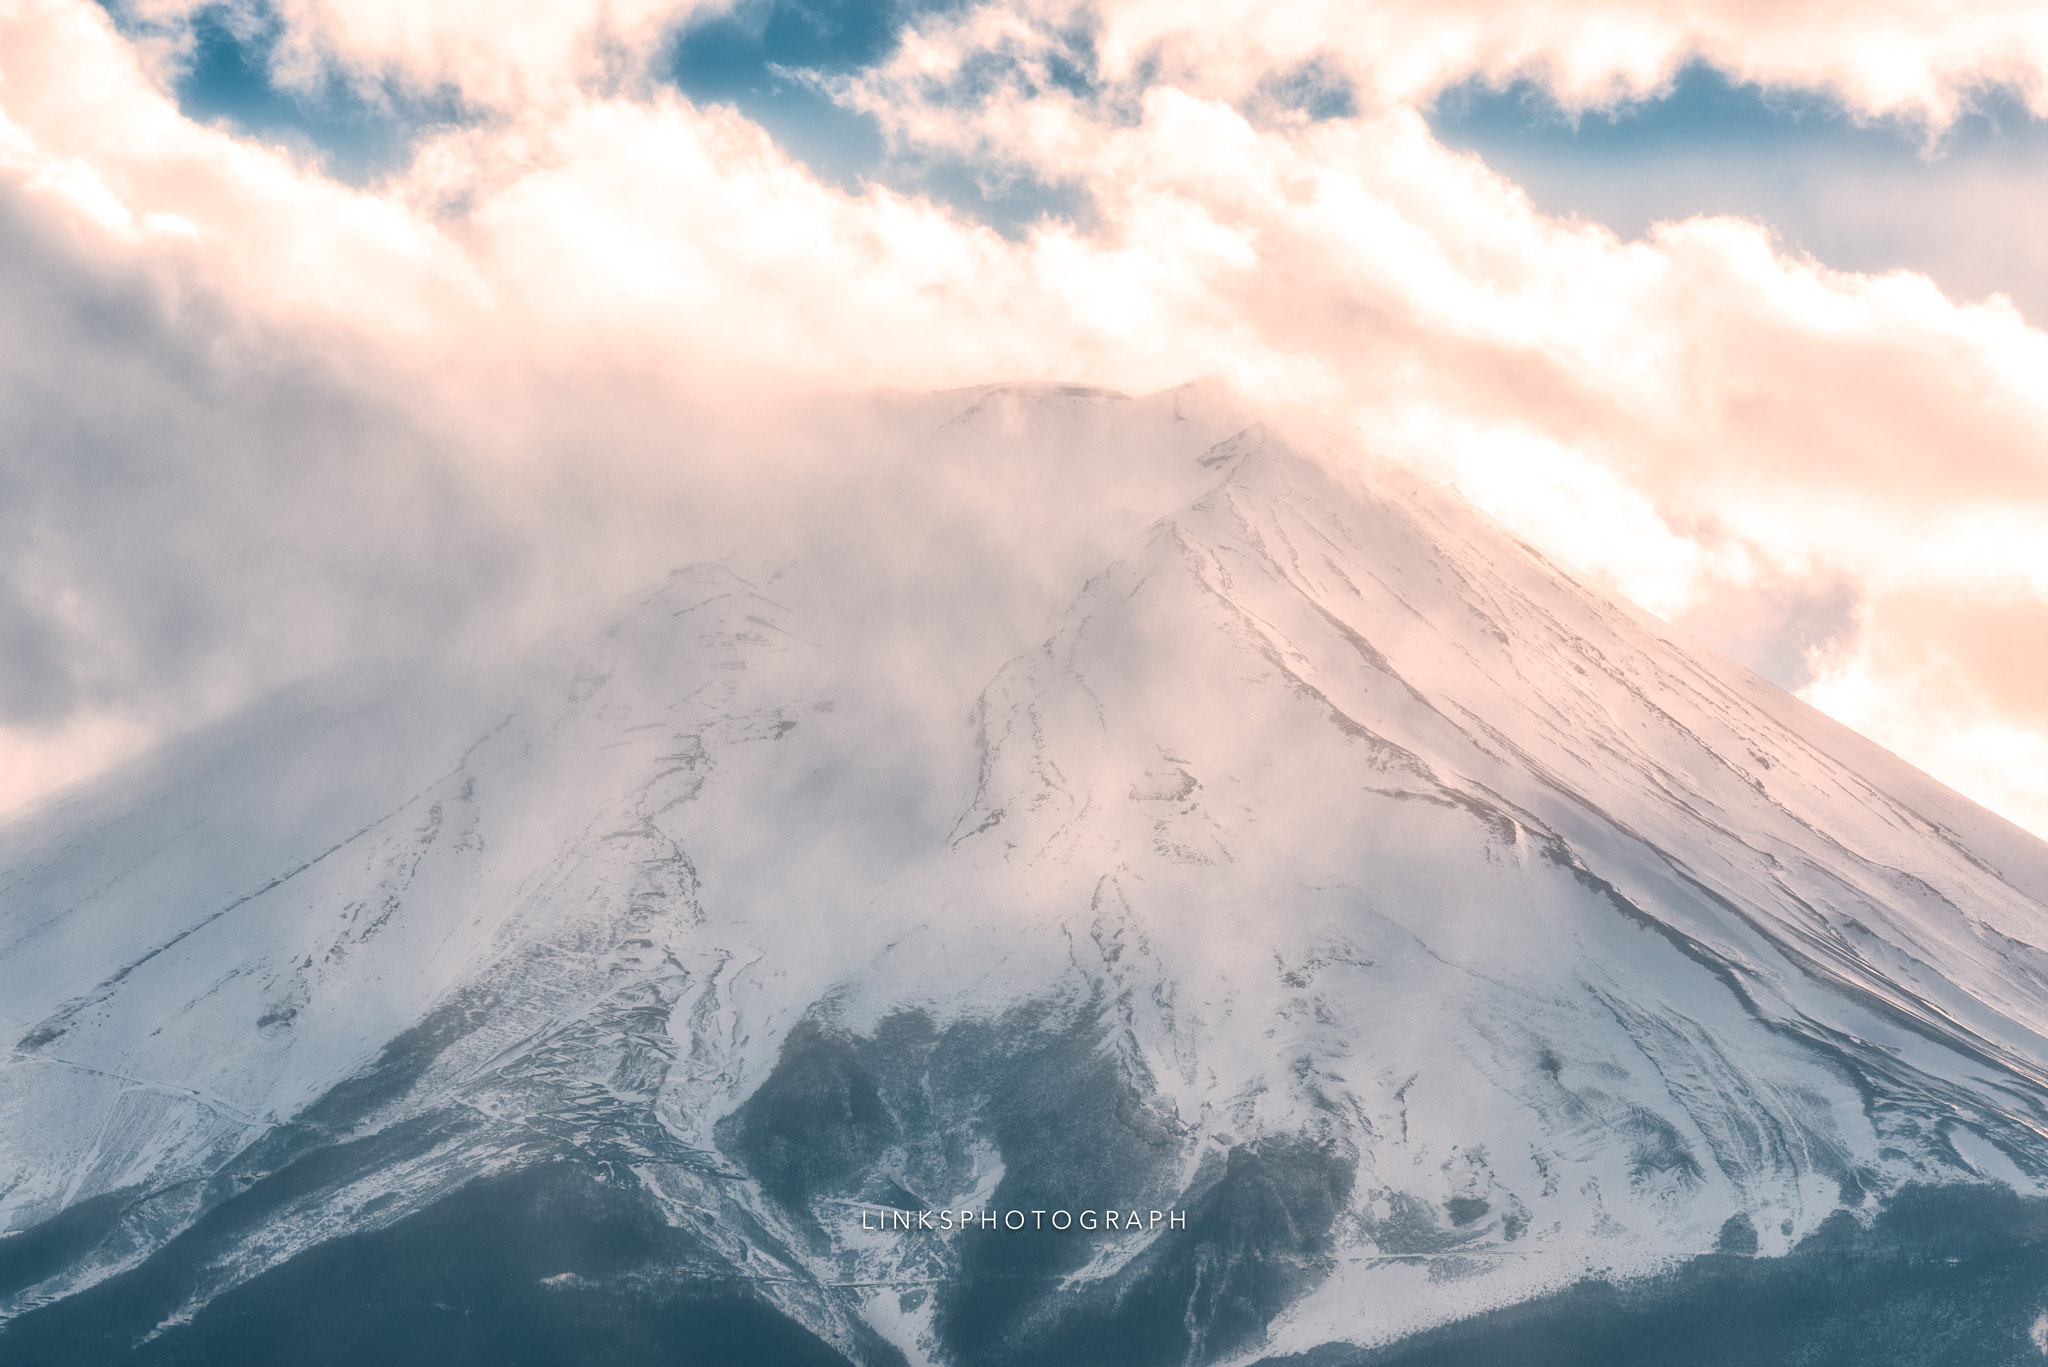 Nikon D810 + Tamron SP 70-200mm F2.8 Di VC USD sample photo. Take a try to guess the mountains' name~ photography